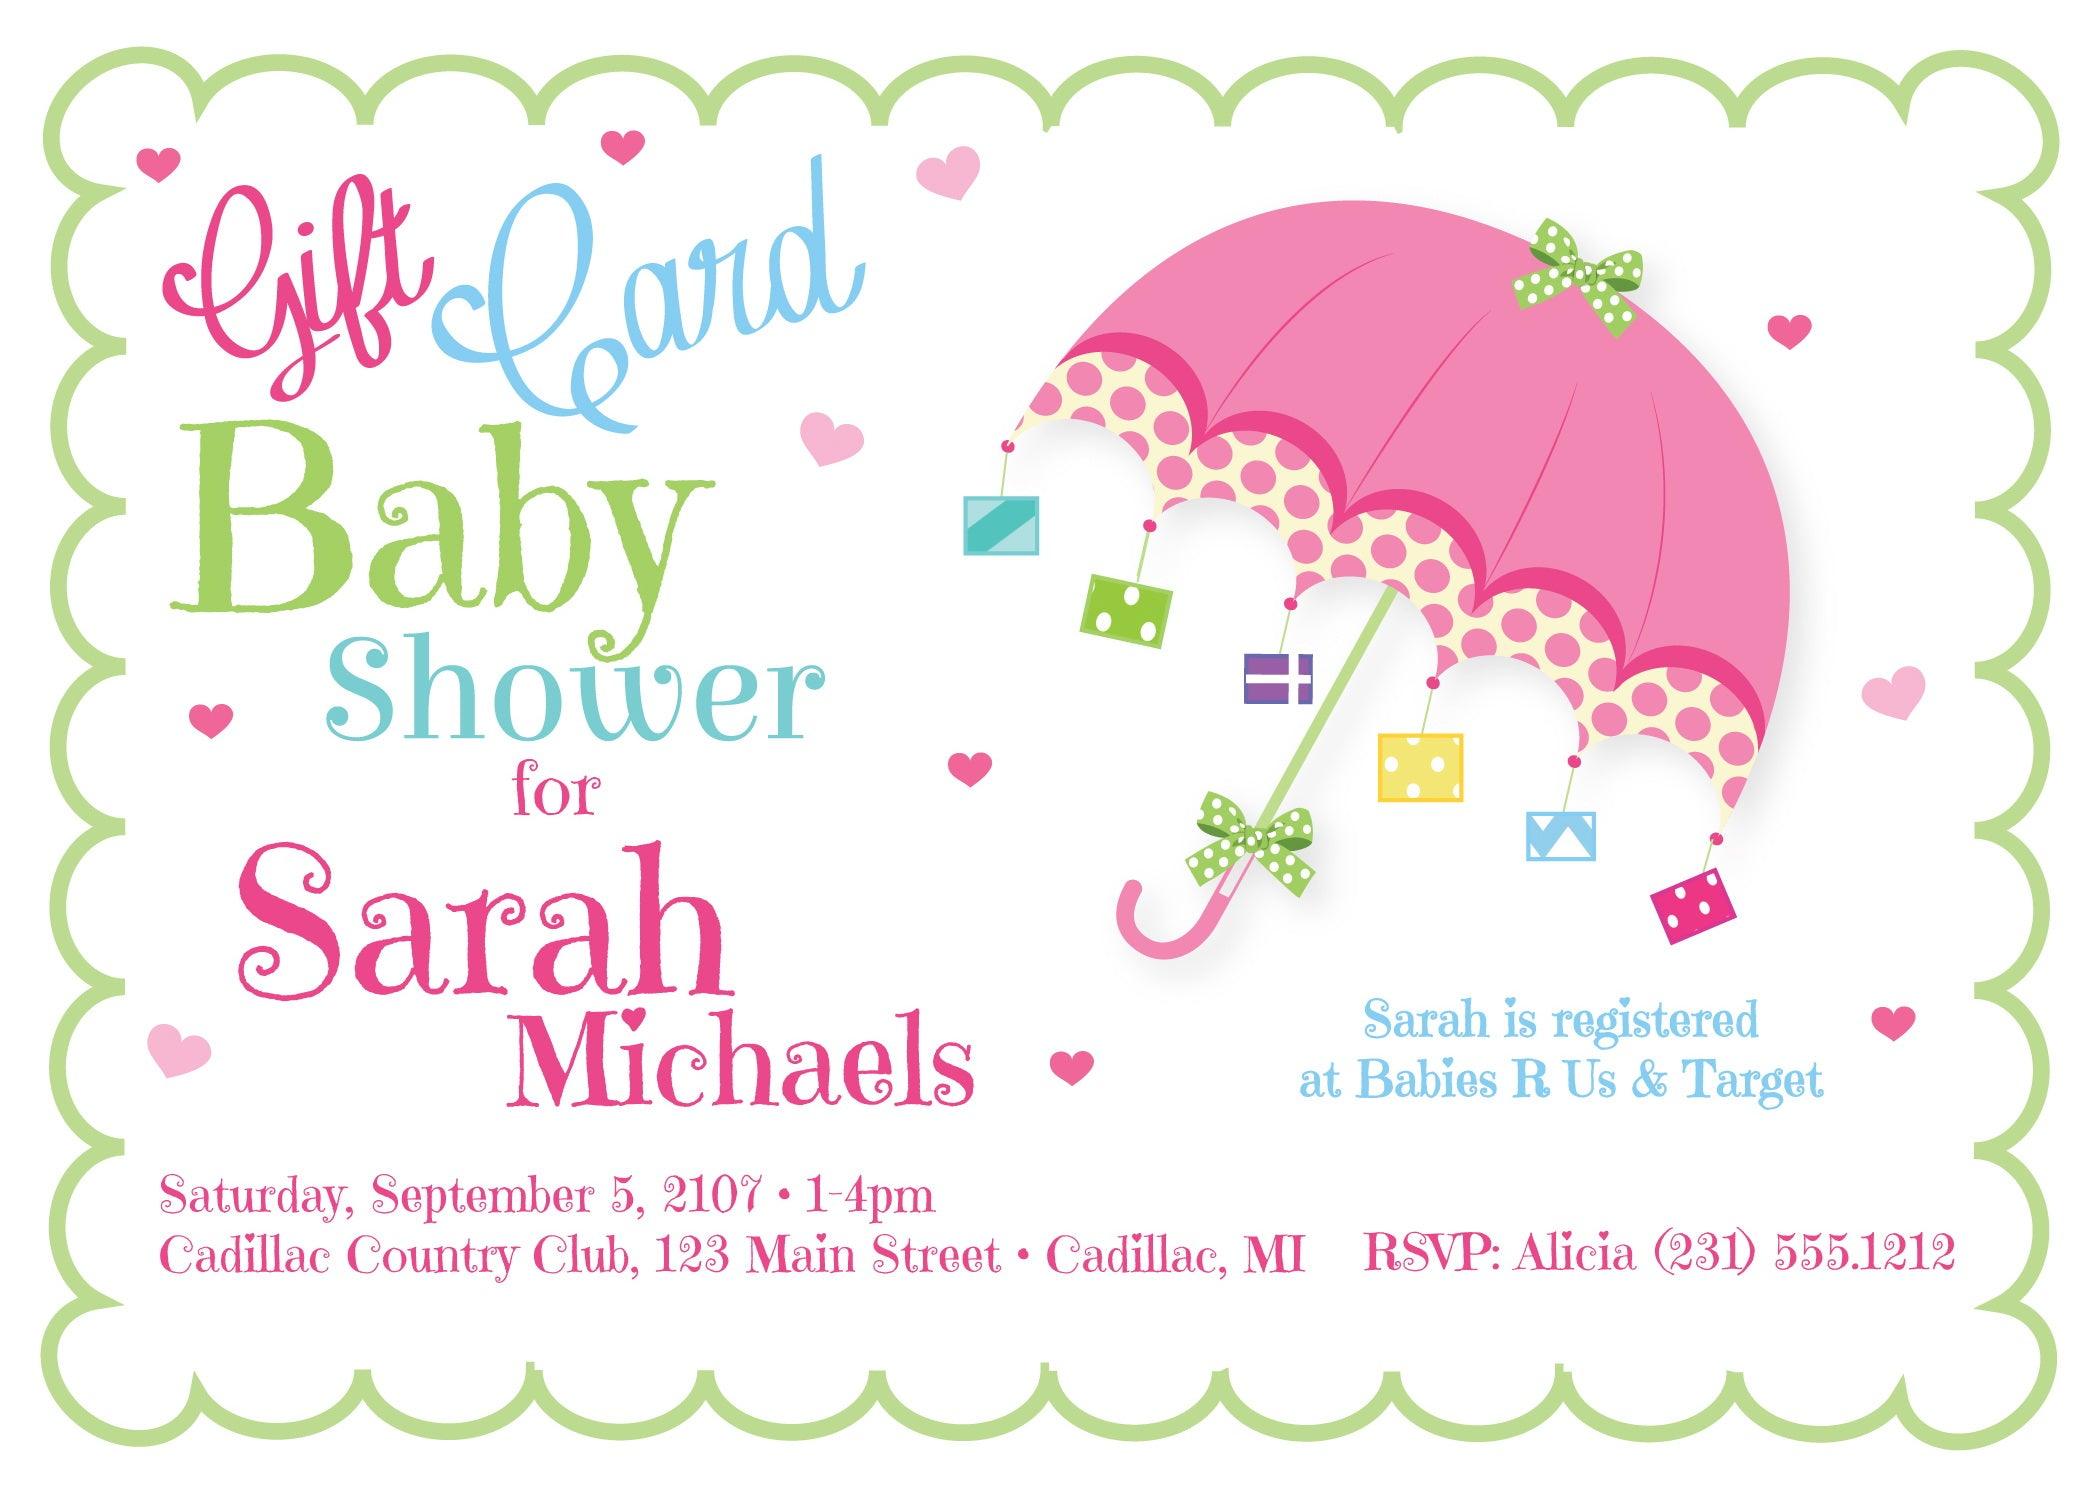 Free Printable Baby Shower Gift Cards : Free Printable Baby Shower Gift List • Glitter 'N Spice / Red apple free baby shower invitations.